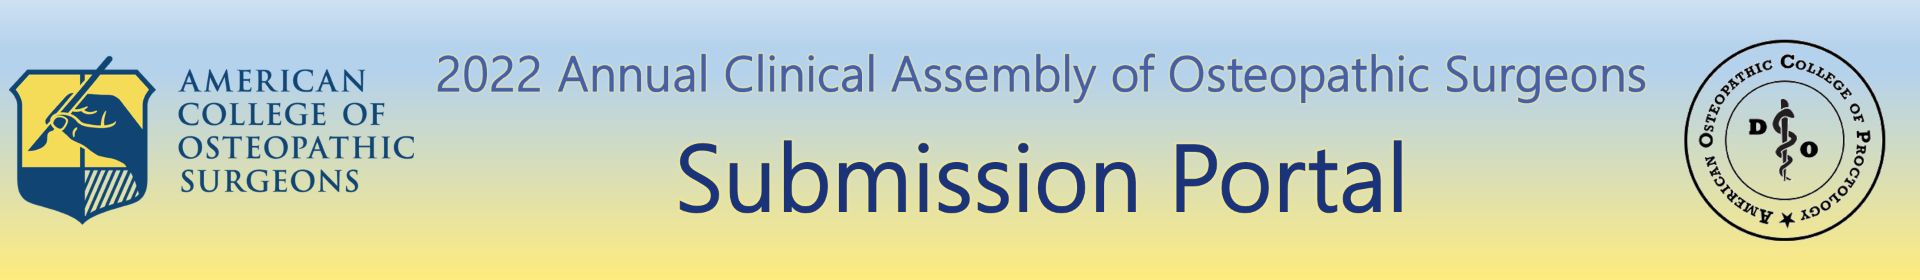 2022 Annual Clinical Assembly of Osteopathic Surgeons (ACA)  Event Banner